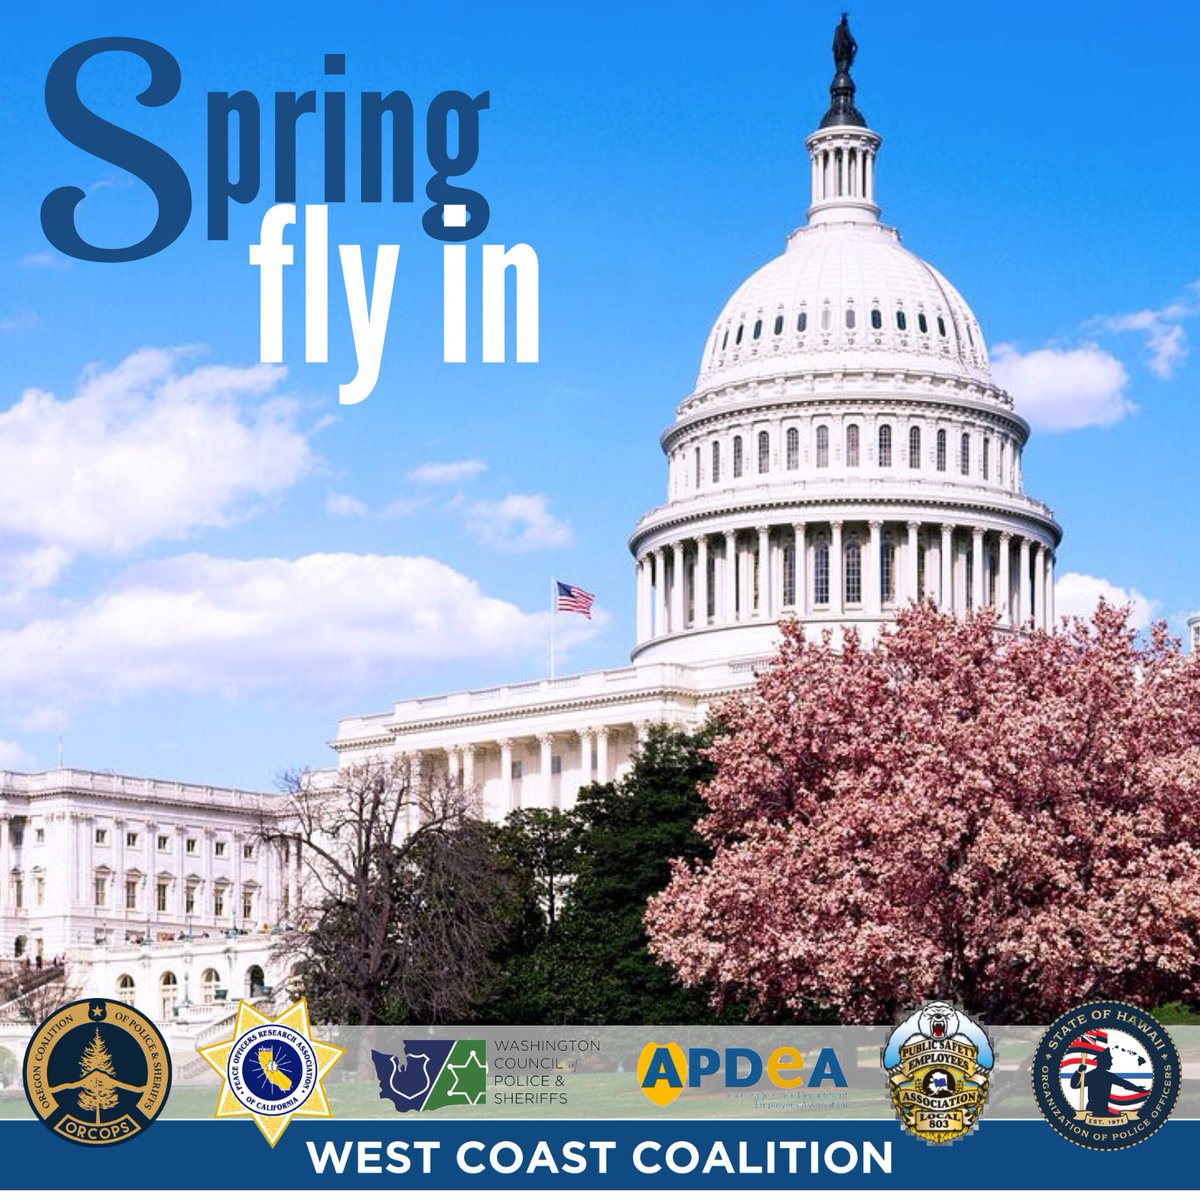 Headed to #DC with w/ the West Coast LE Coalition. Advocating for public safety & LE. @PORACalifornia @wacops_official #ORCOPS #SHOPO #APDEA #PSEA #PORAC #WeArePORAC #Membership #PoliceUnion #PublicSafety #LawEnforcement